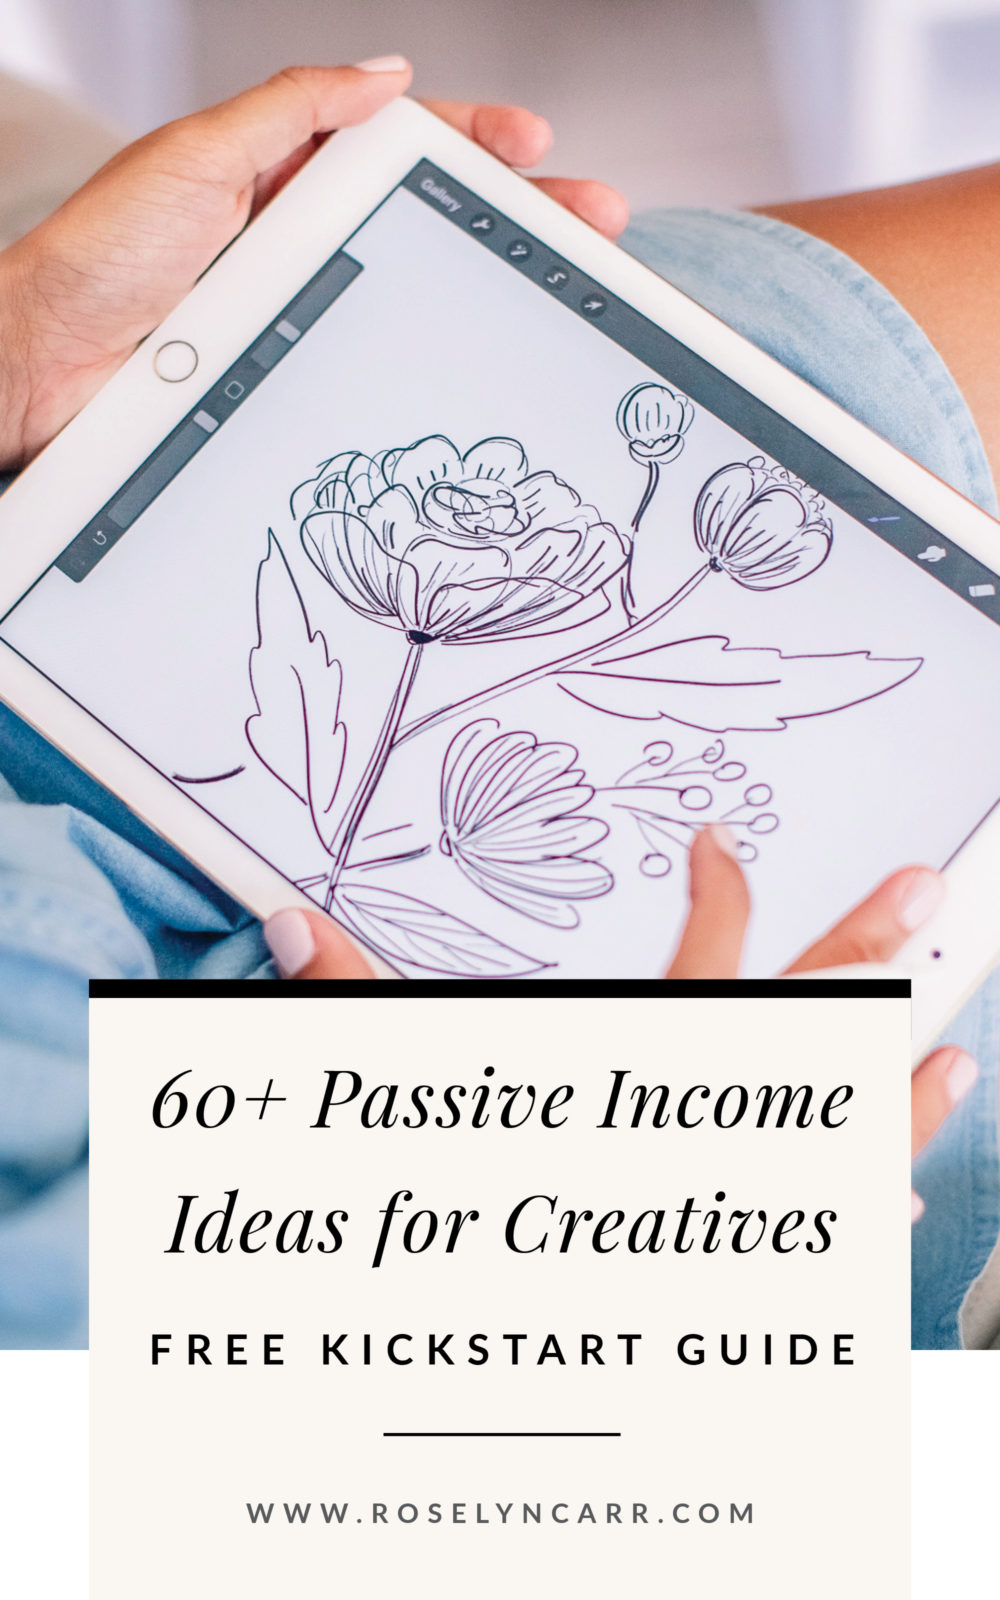 60+ Passive Income Ideas for Creatives and Artists